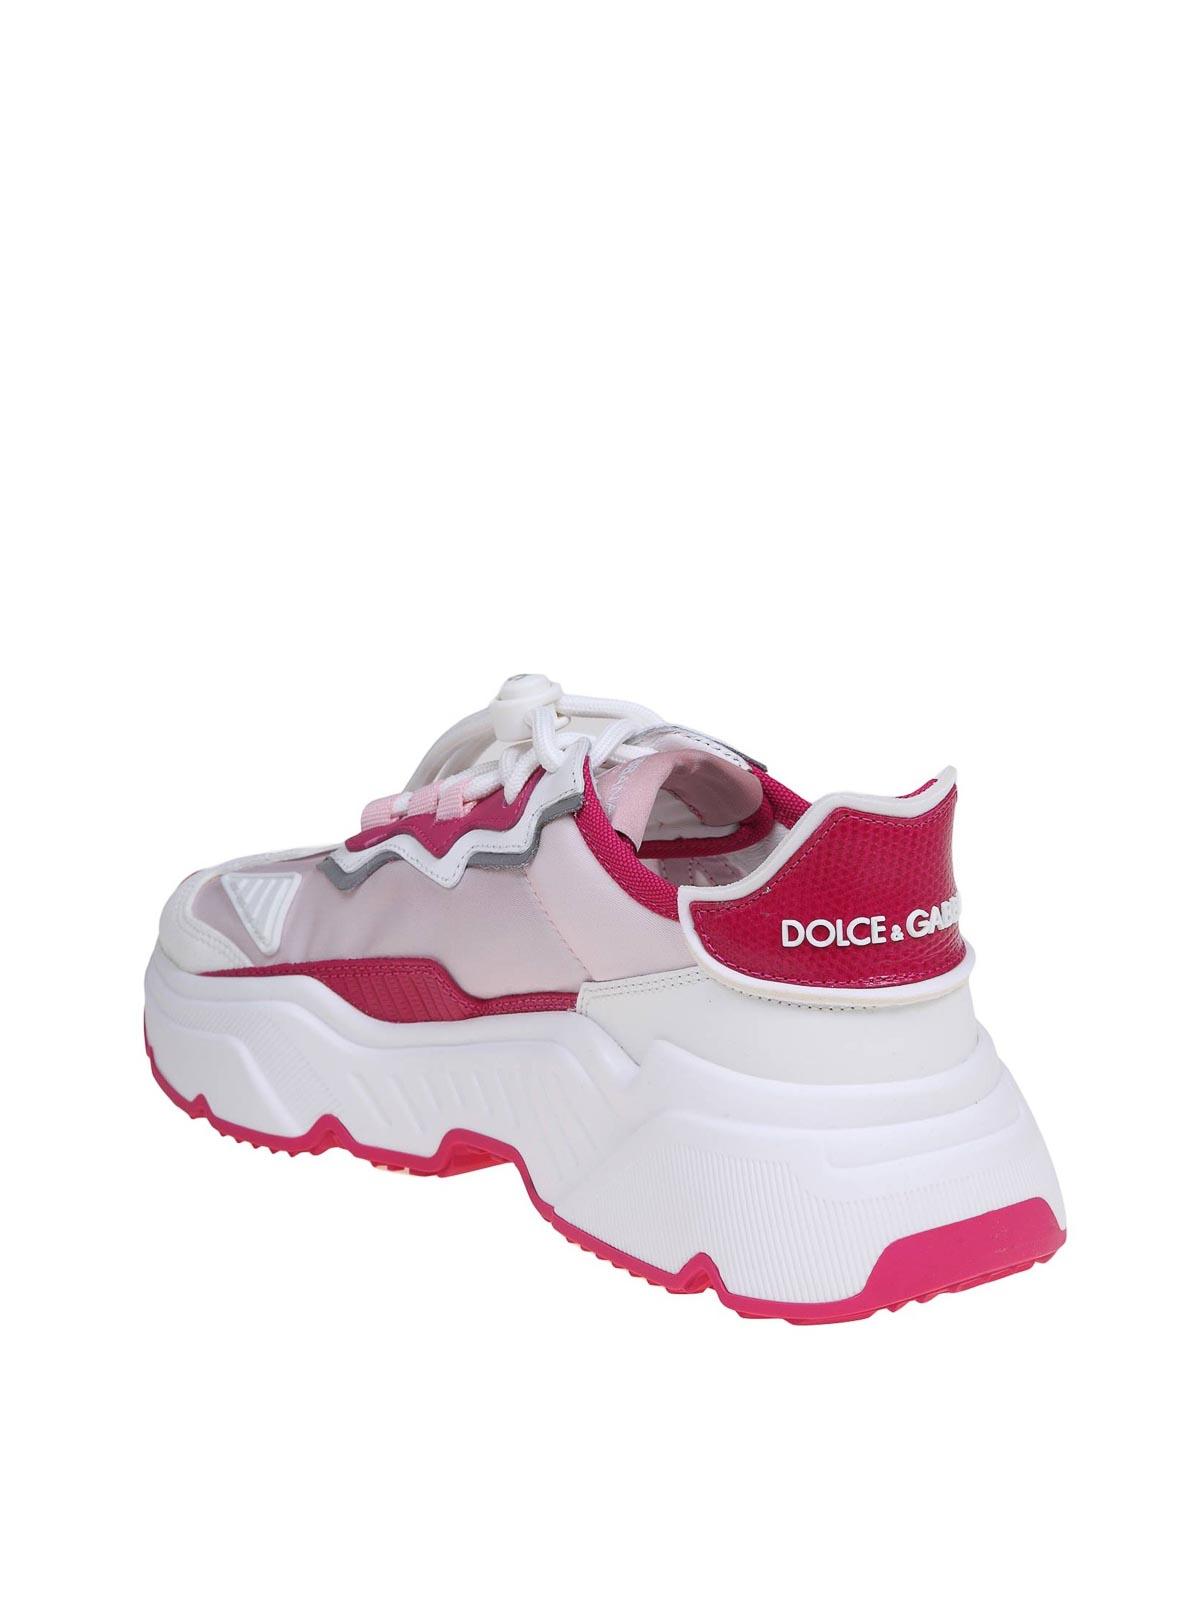 Dolce & Gabbana Daymaster Sneakers in White | Lyst UK